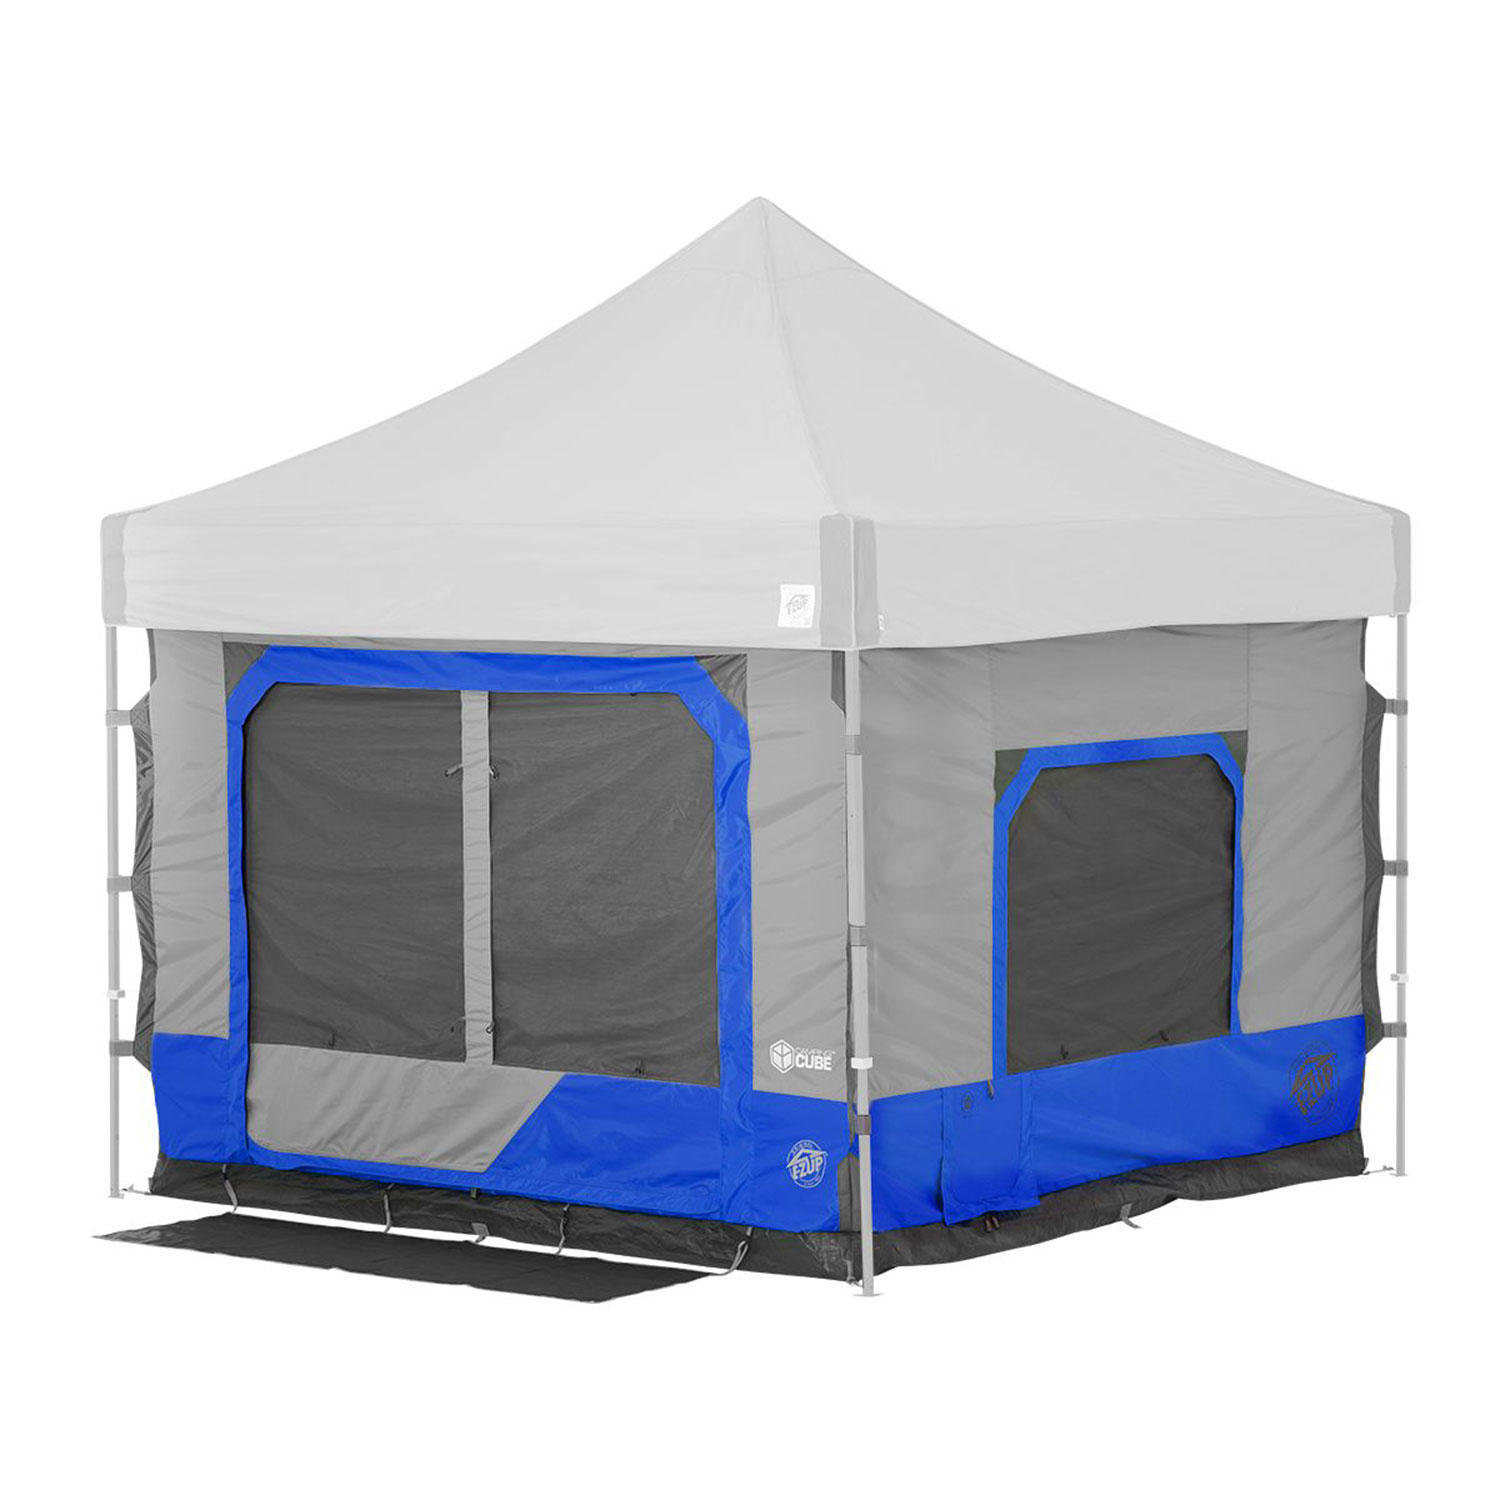 EZ UP CAMPING CUBE 6.4 CONVERTS 10FT STRAIGHT LEG CANOPY INTO CAMPING TENT ROYAL BLUE